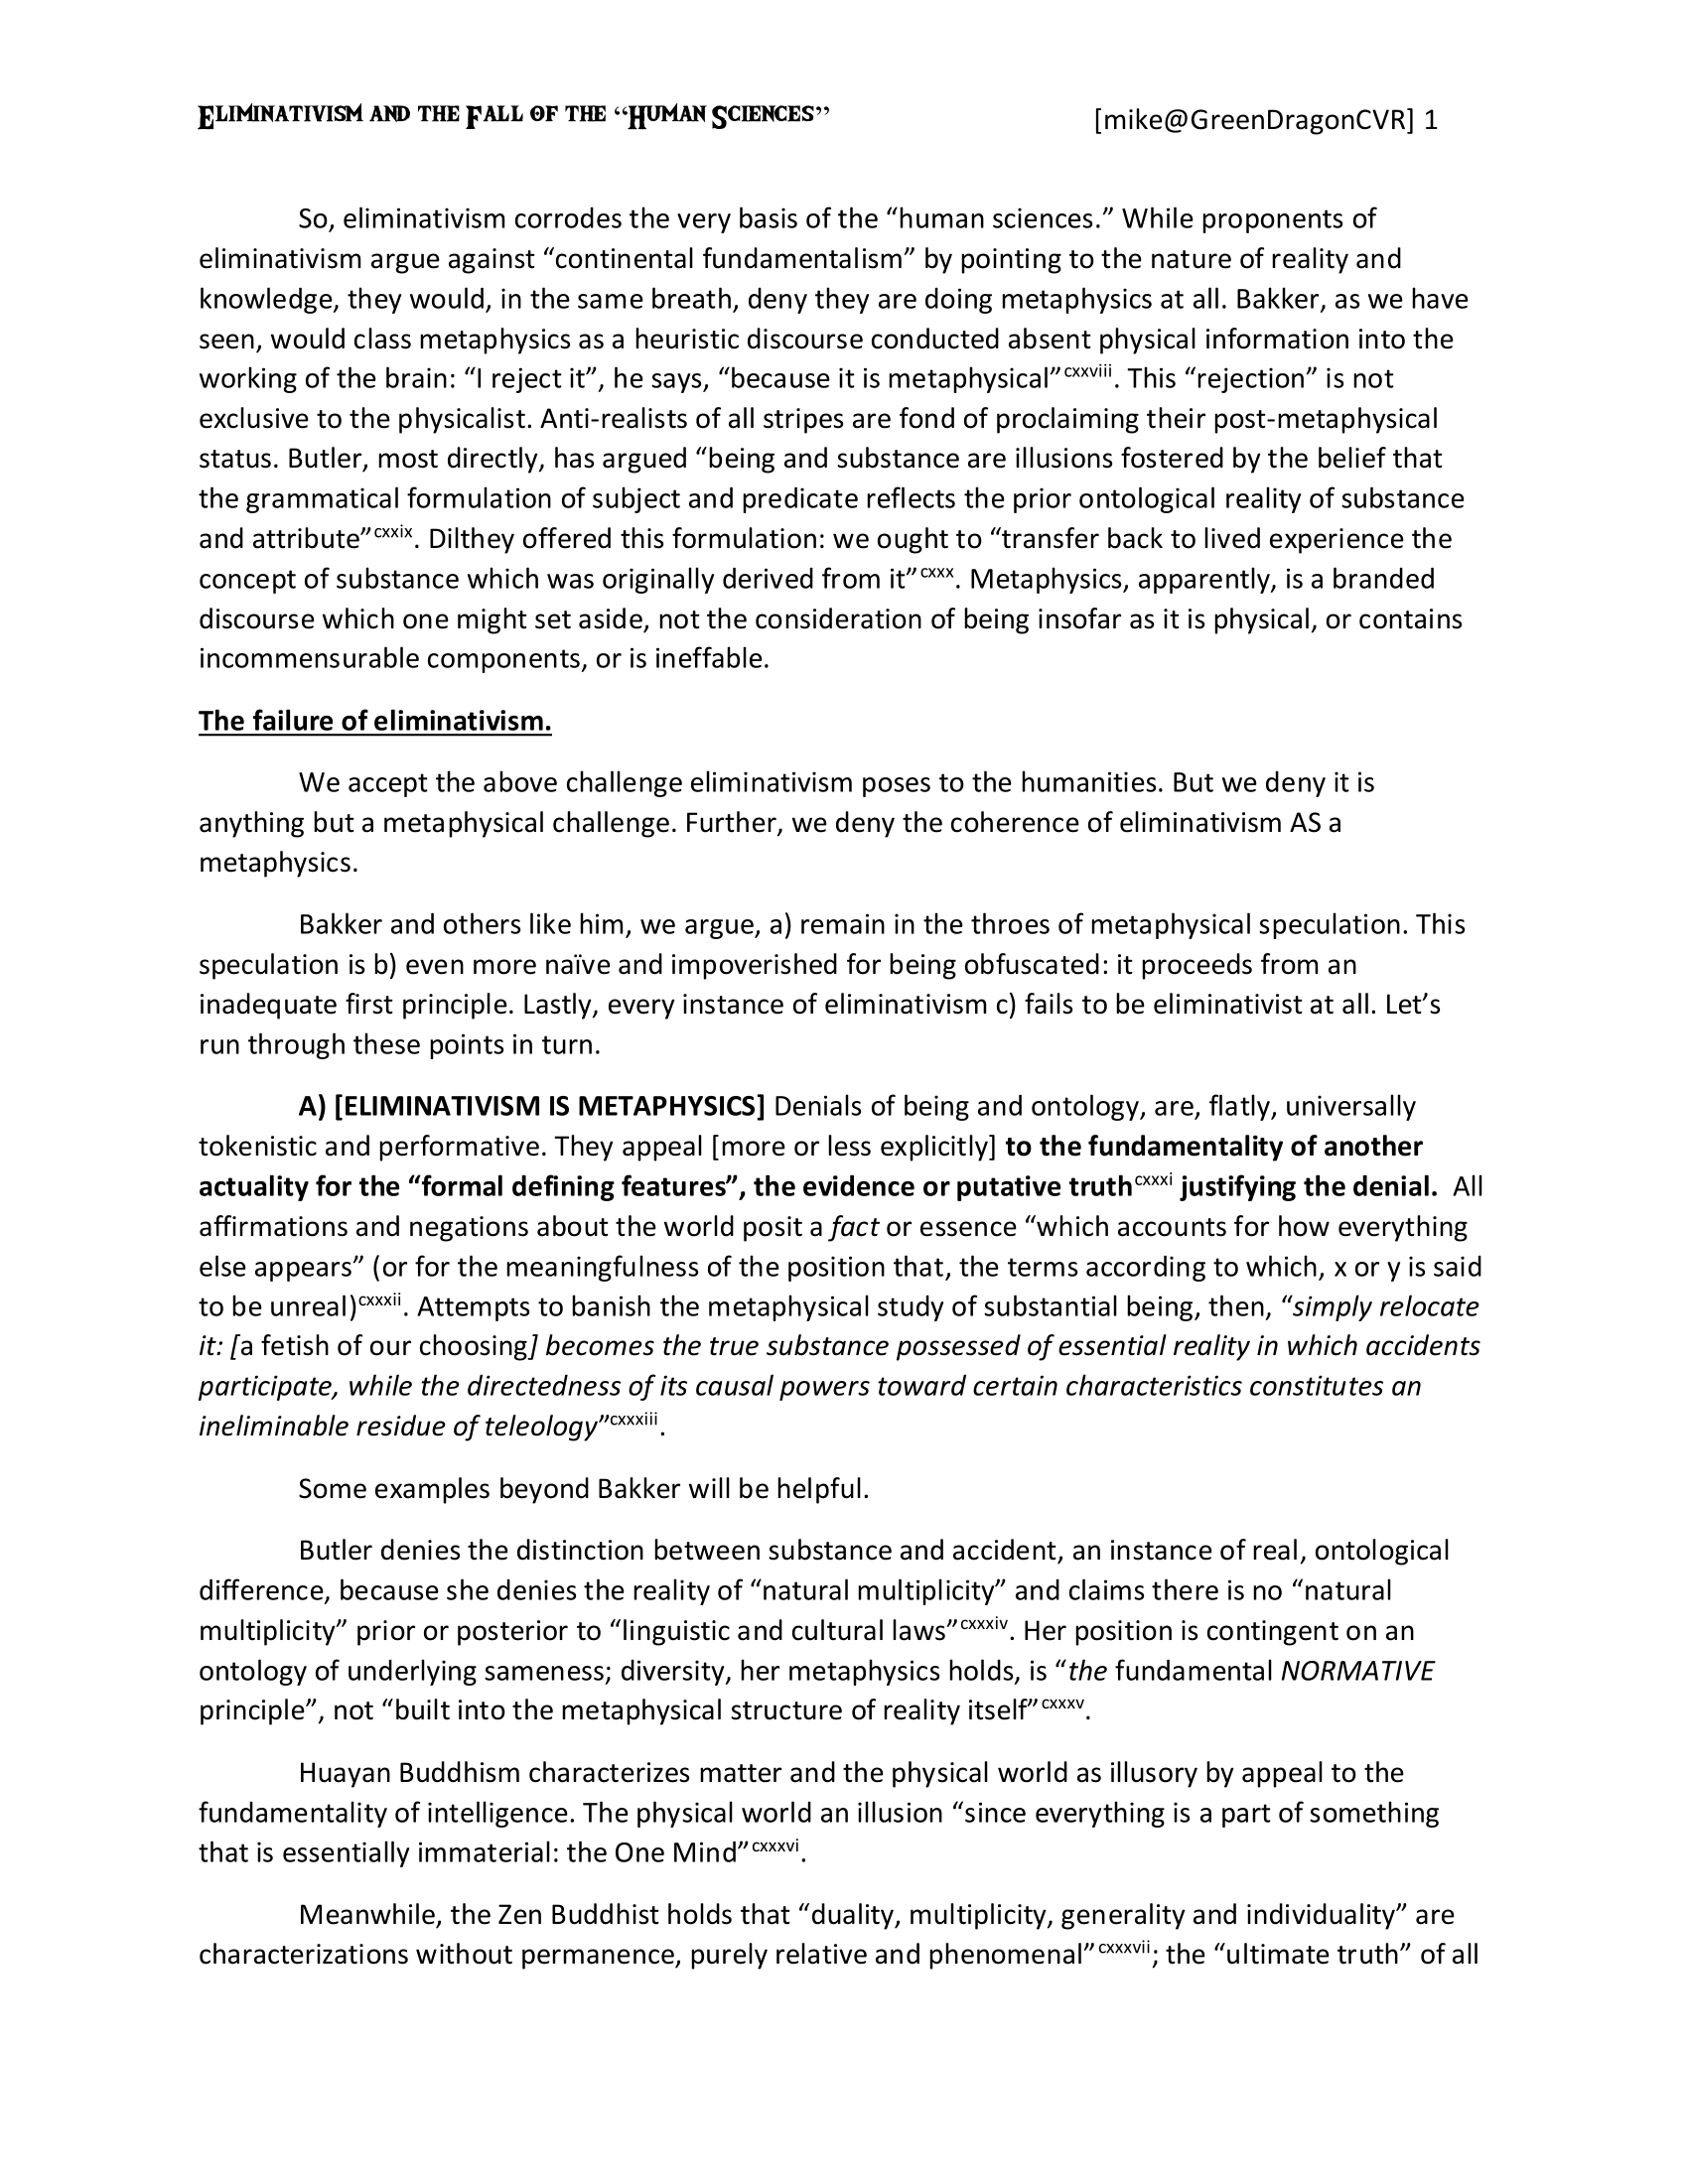 Eliminativism and the Fall of the Human Sciences-09.png